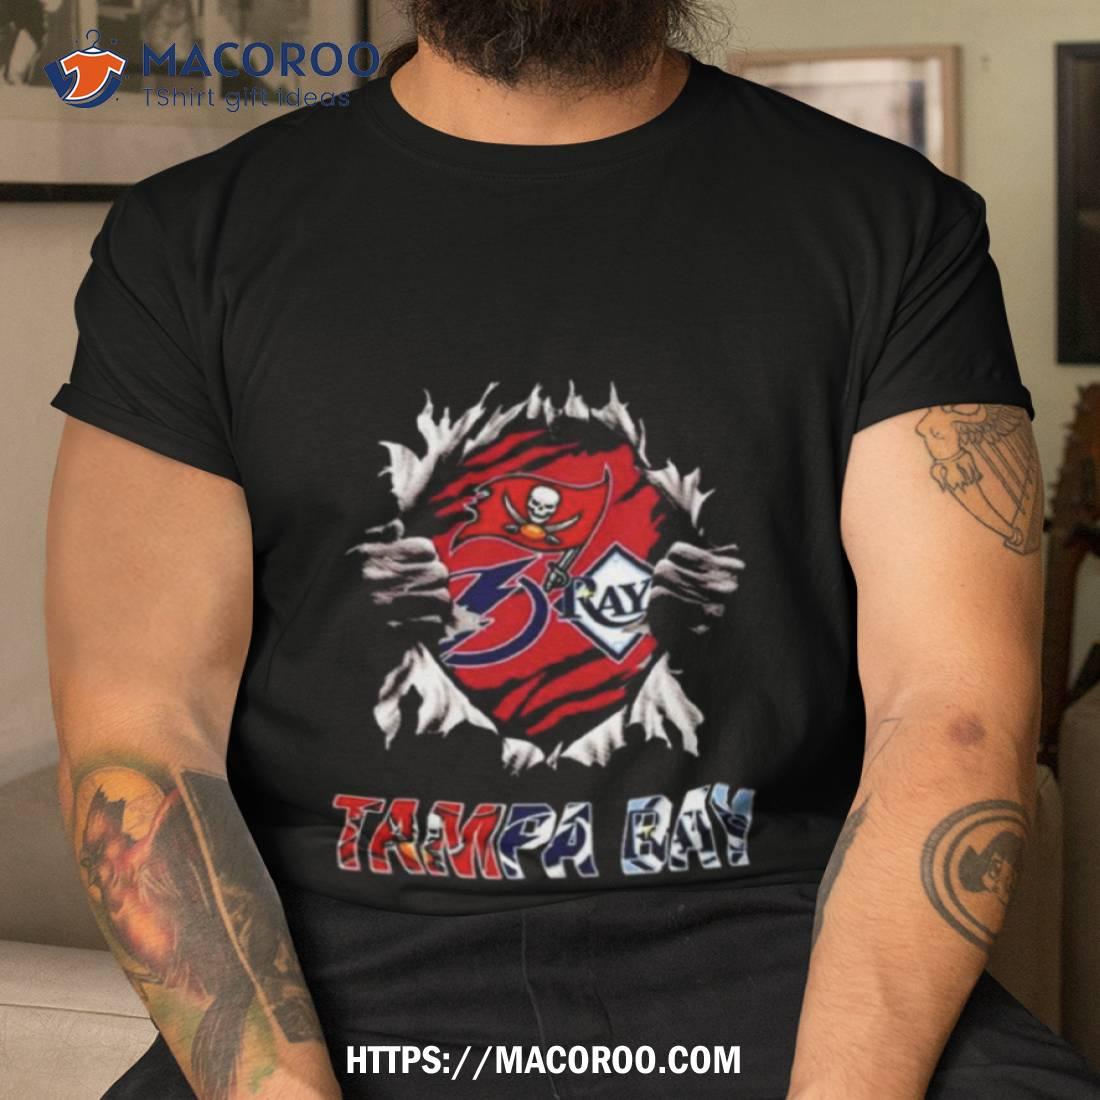 Design blood inside me Tampa Bay Buccaneers and Tampa Bay